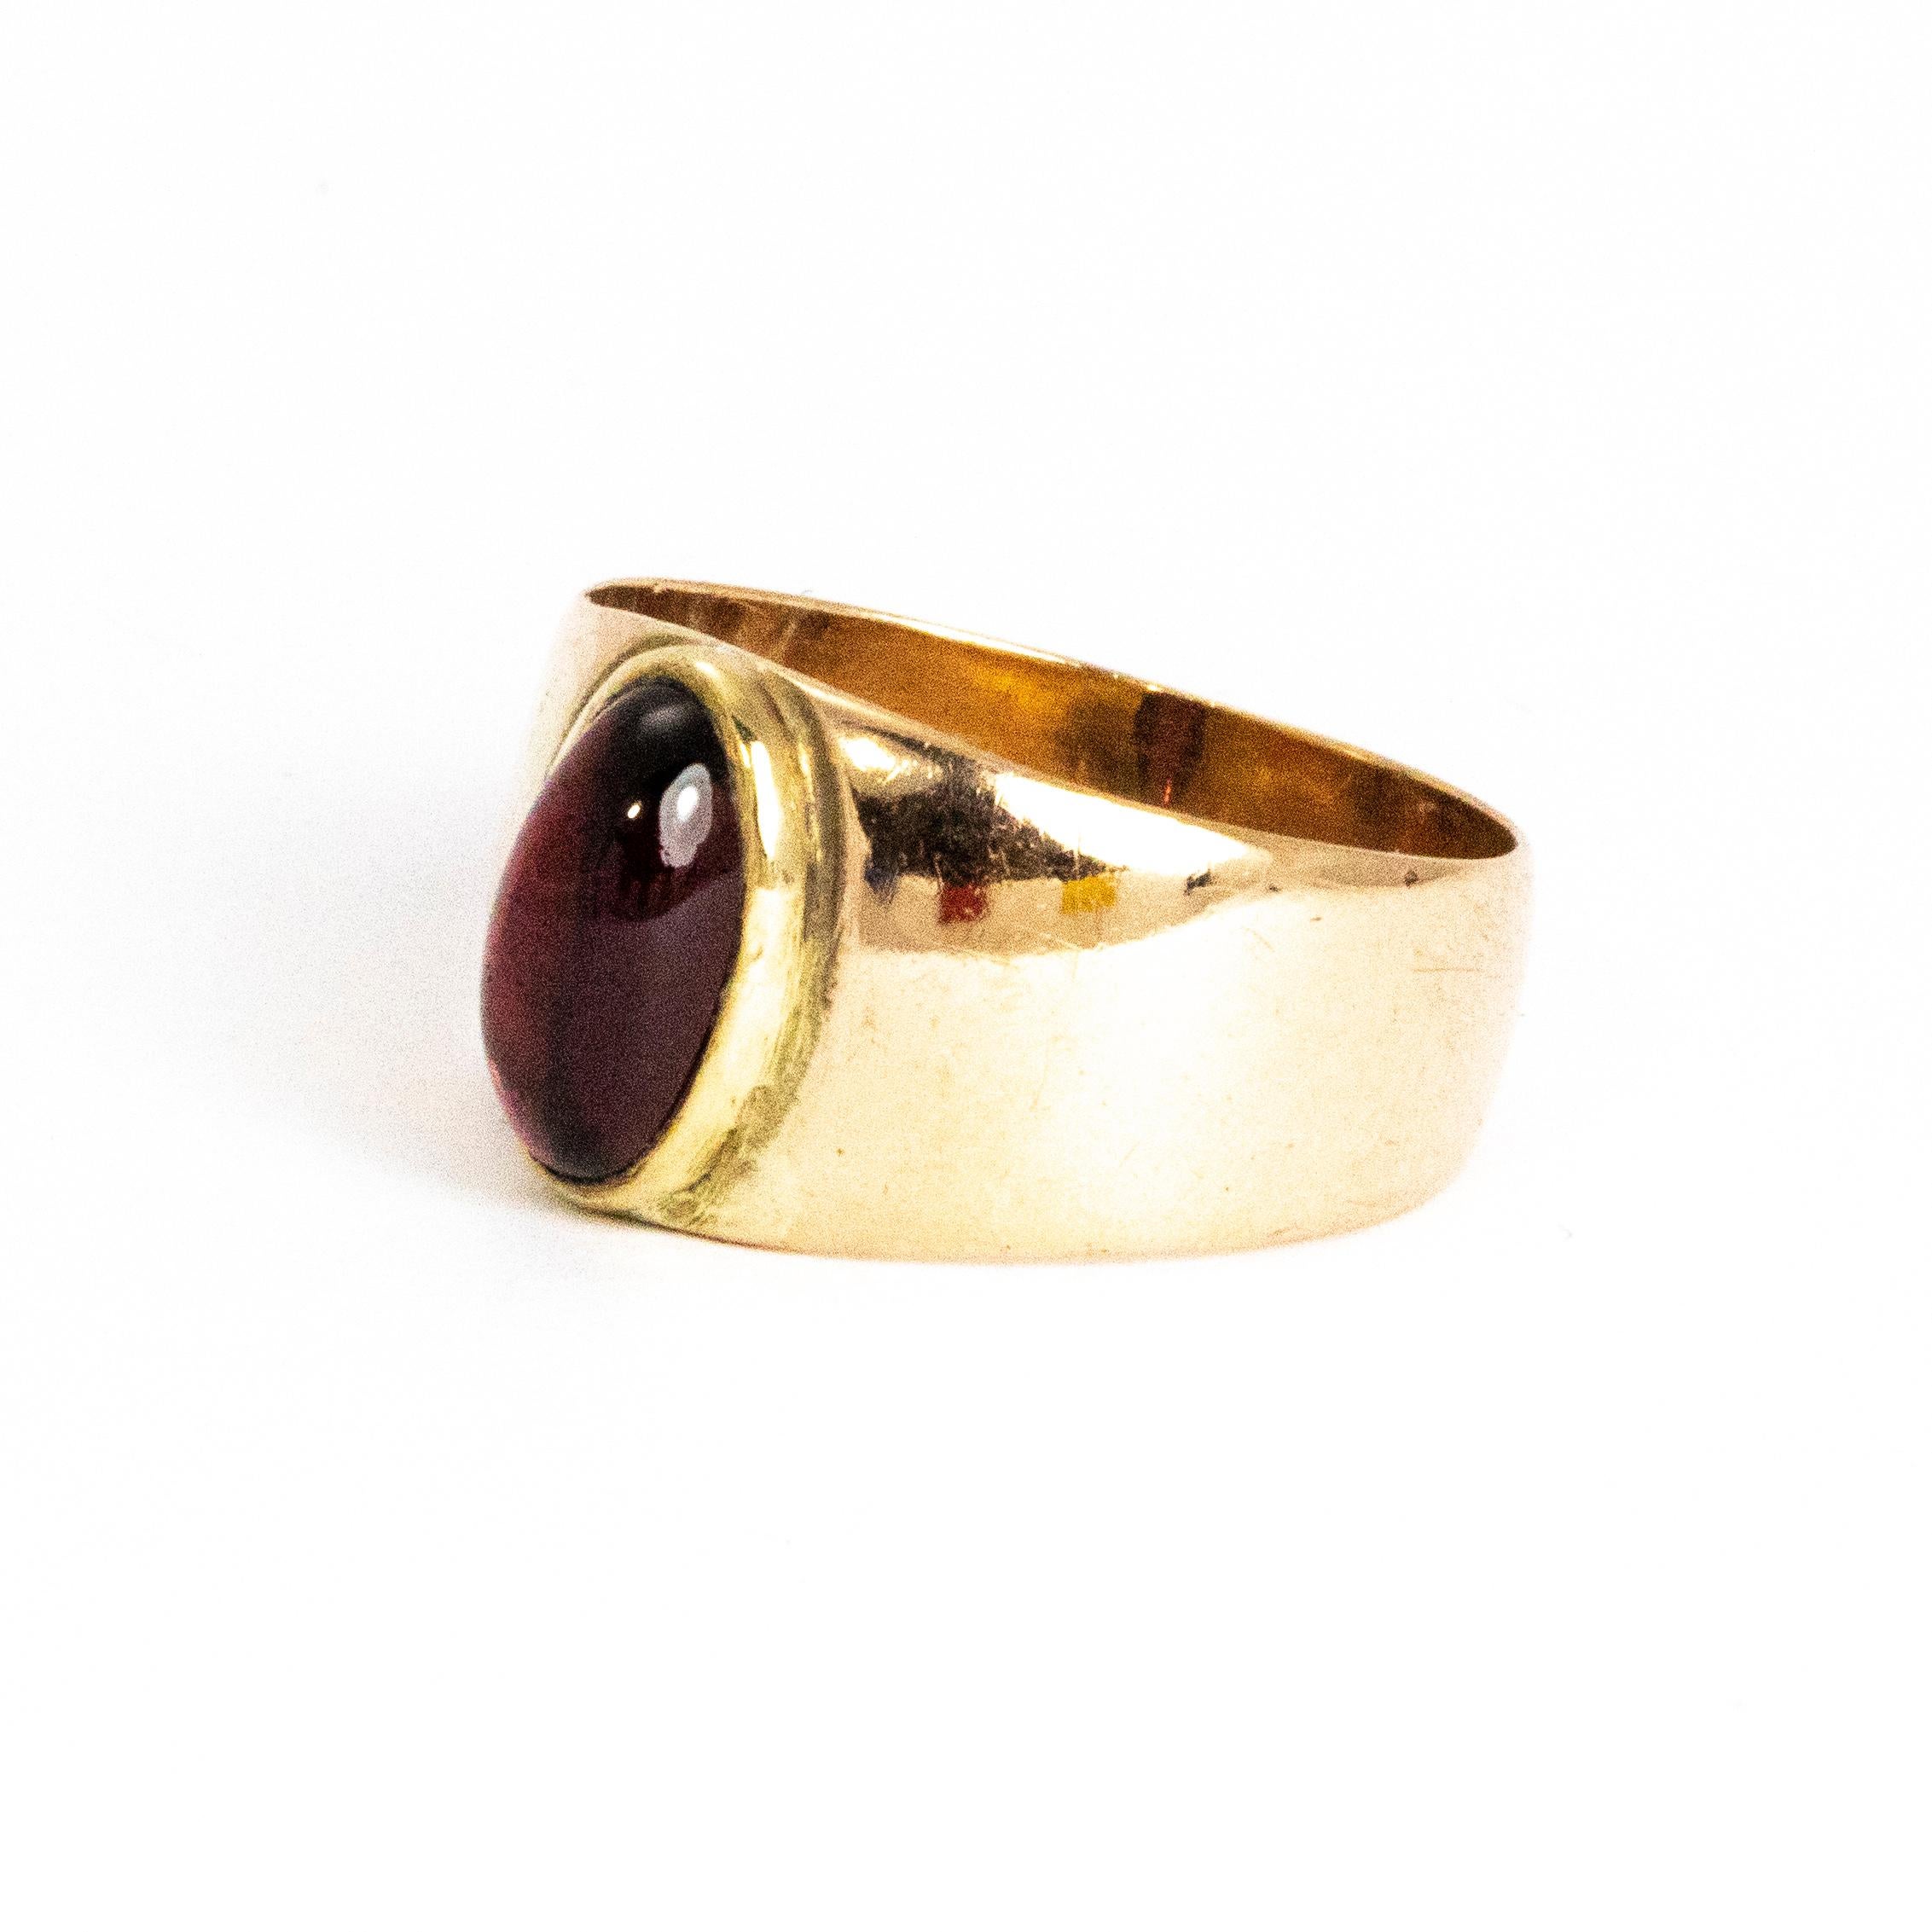 This glossy oval garnet cabochon is held in a grooved setting on a chunky 9ct gold band. The band is wide by quite slim in thickness making it very comfortable to wear.

Ring Size: M or 6 1/4 
Band Width: 5mm 